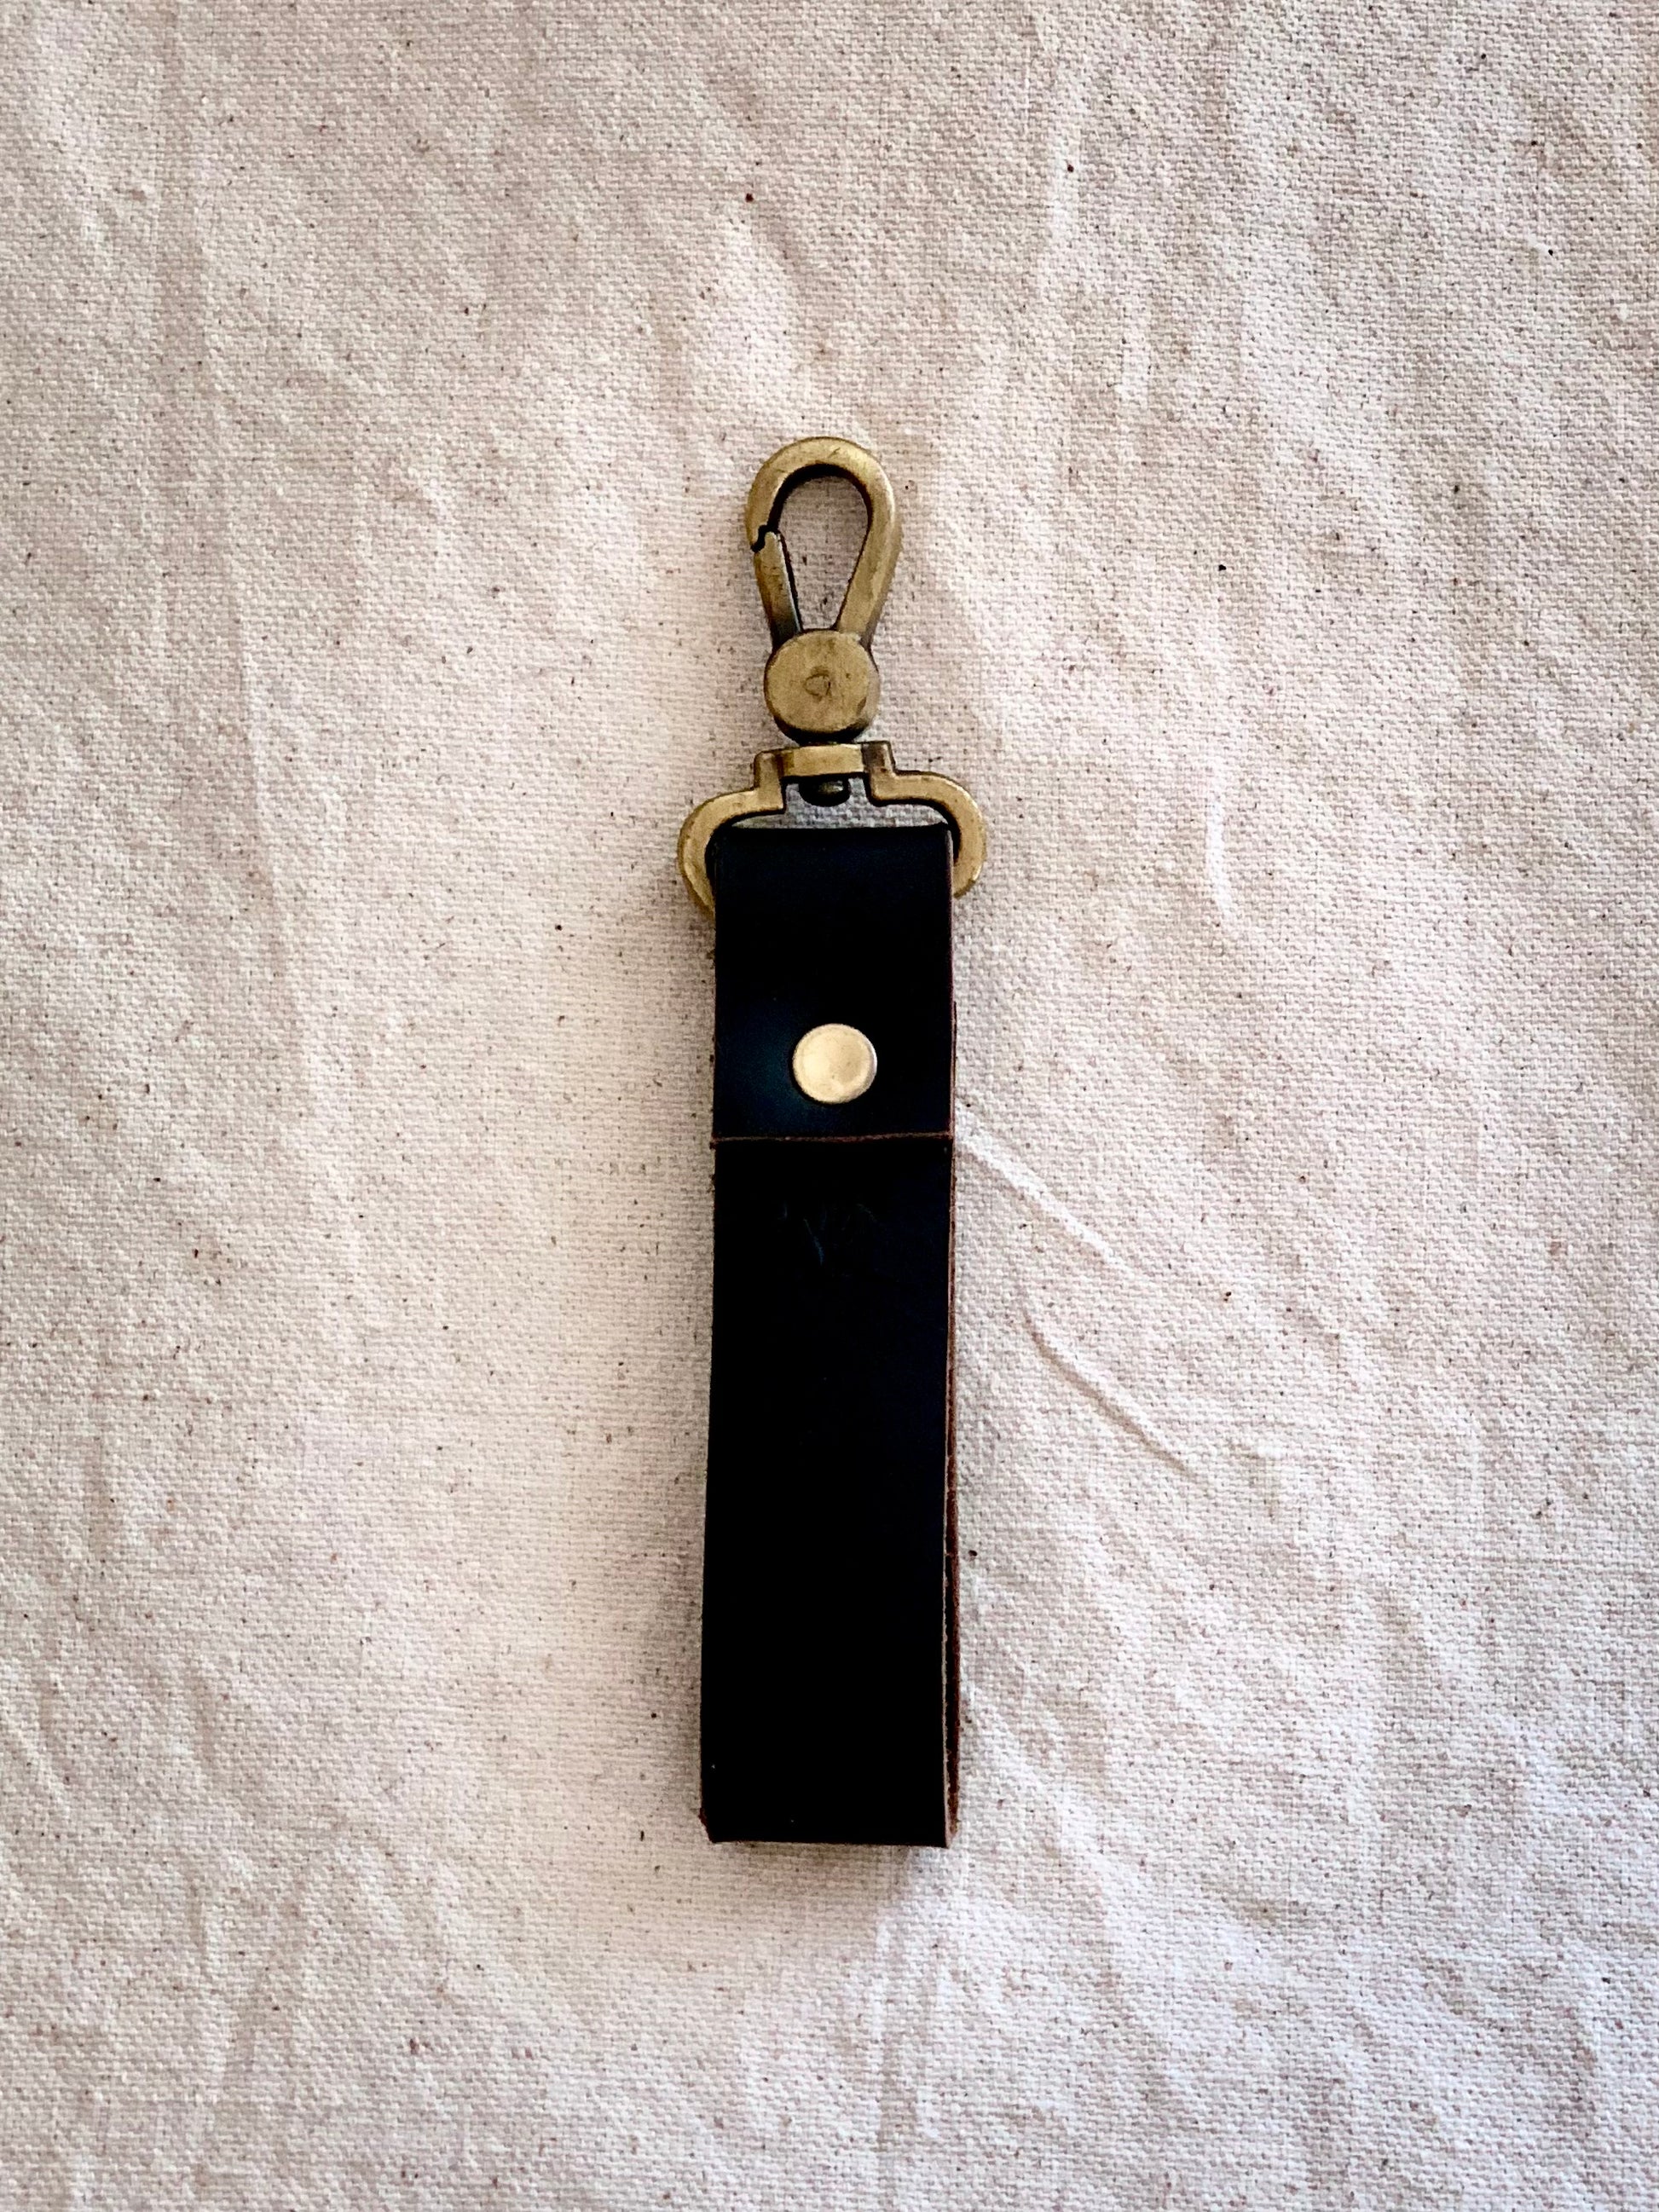 Photo of the Leather Key Strap, showcasing the premium quality leather and brass clasp that holds your keys. The loop at the other end makes it easy to attach to your belt, bag, or for holding, while the simple yet elegant design complements any style. The photo shows the key strap attached to a model's bag, with a focus on the intricate details and the high-quality materials used in crafting the strap.